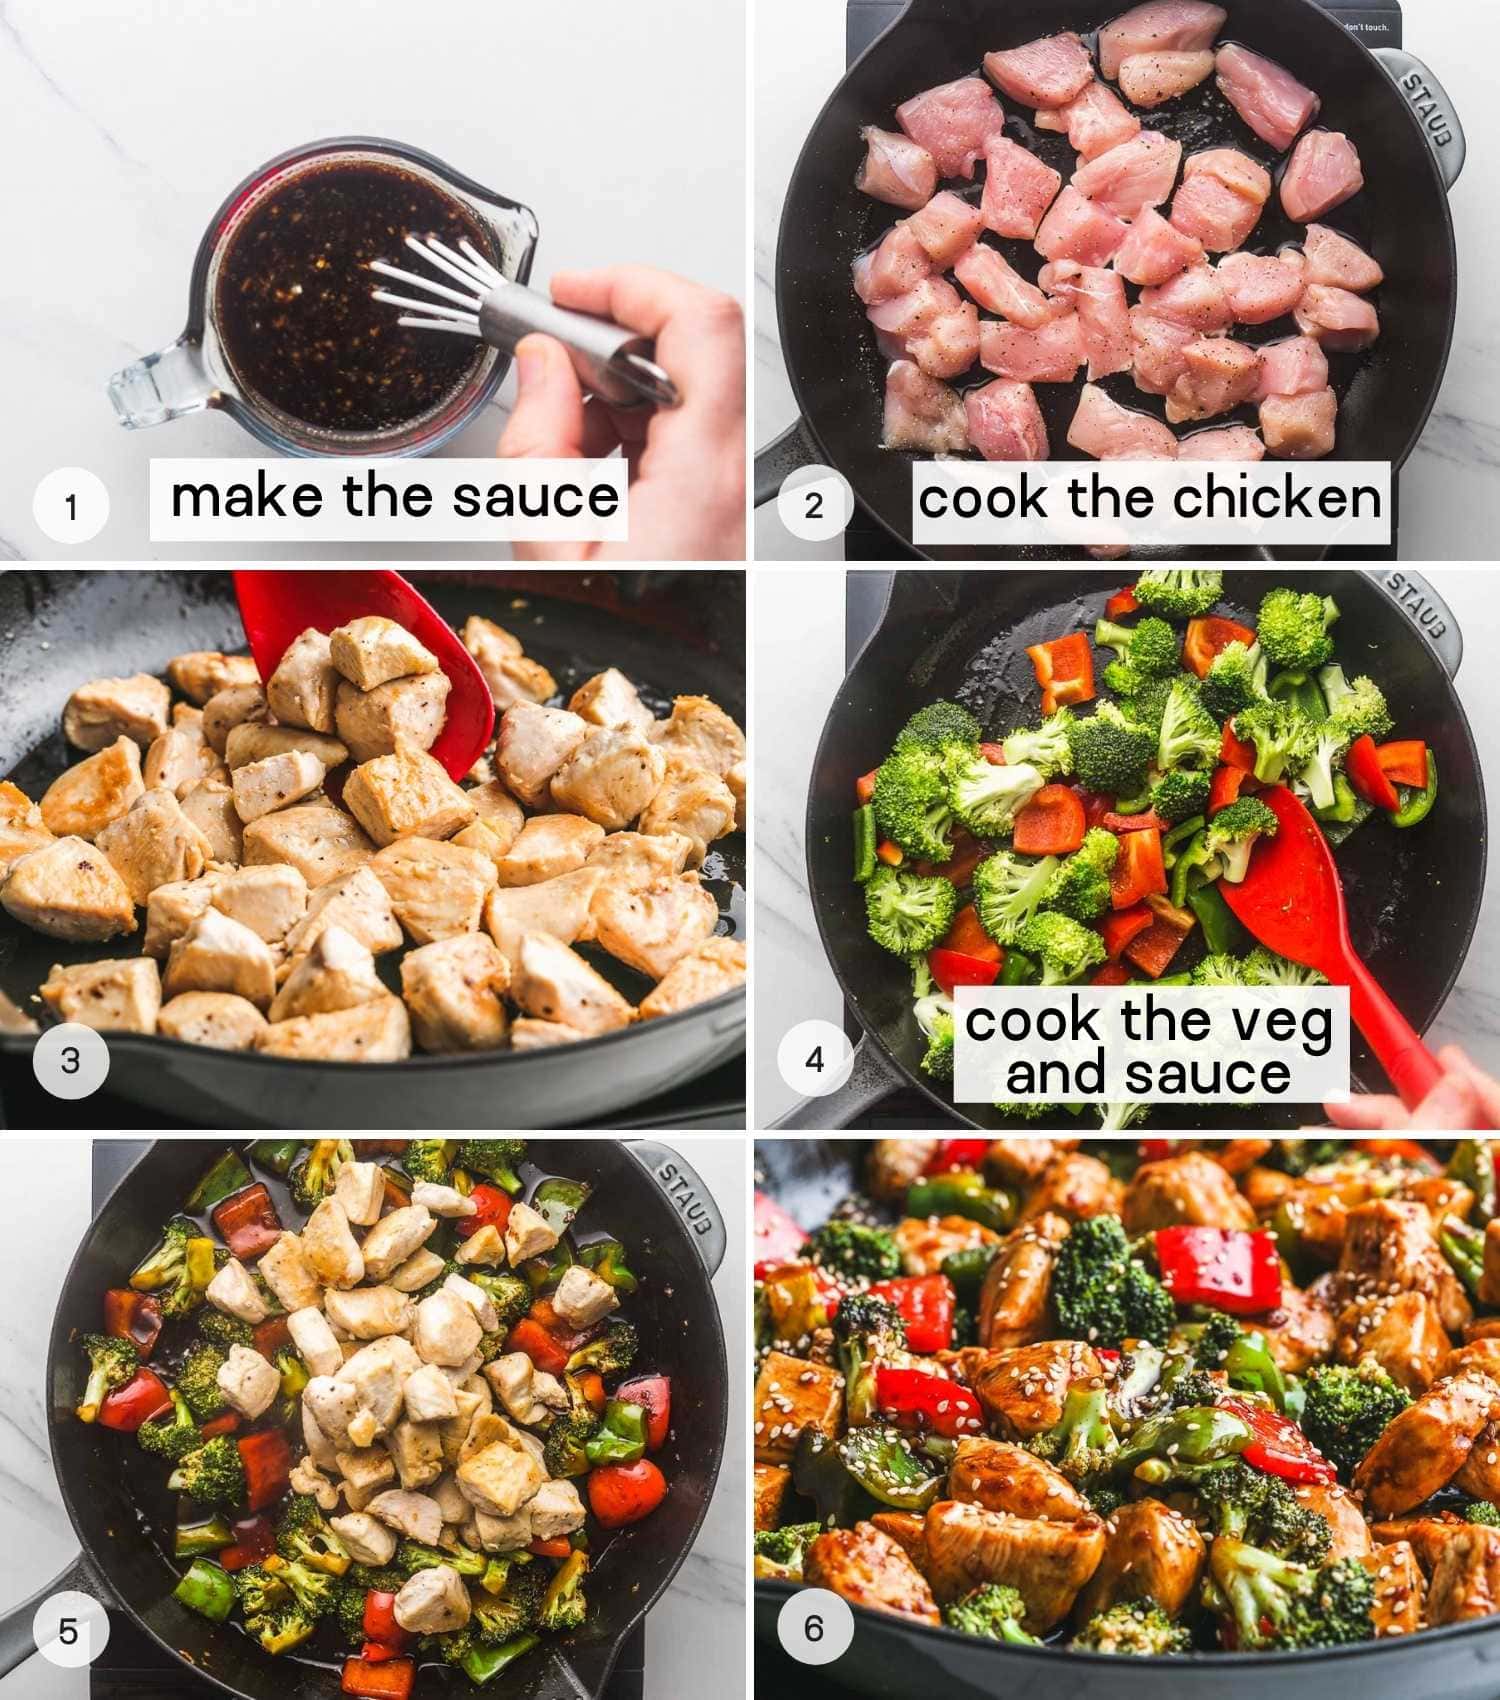 A collage with 6 images on how to make the chicken teriyaki stir fry with vegetables. Starting from making the sauce, to cooking the chicken, adding the vegetables and cooking with the sauce, then adding the chicken back in and garnishing with sesame seeds.